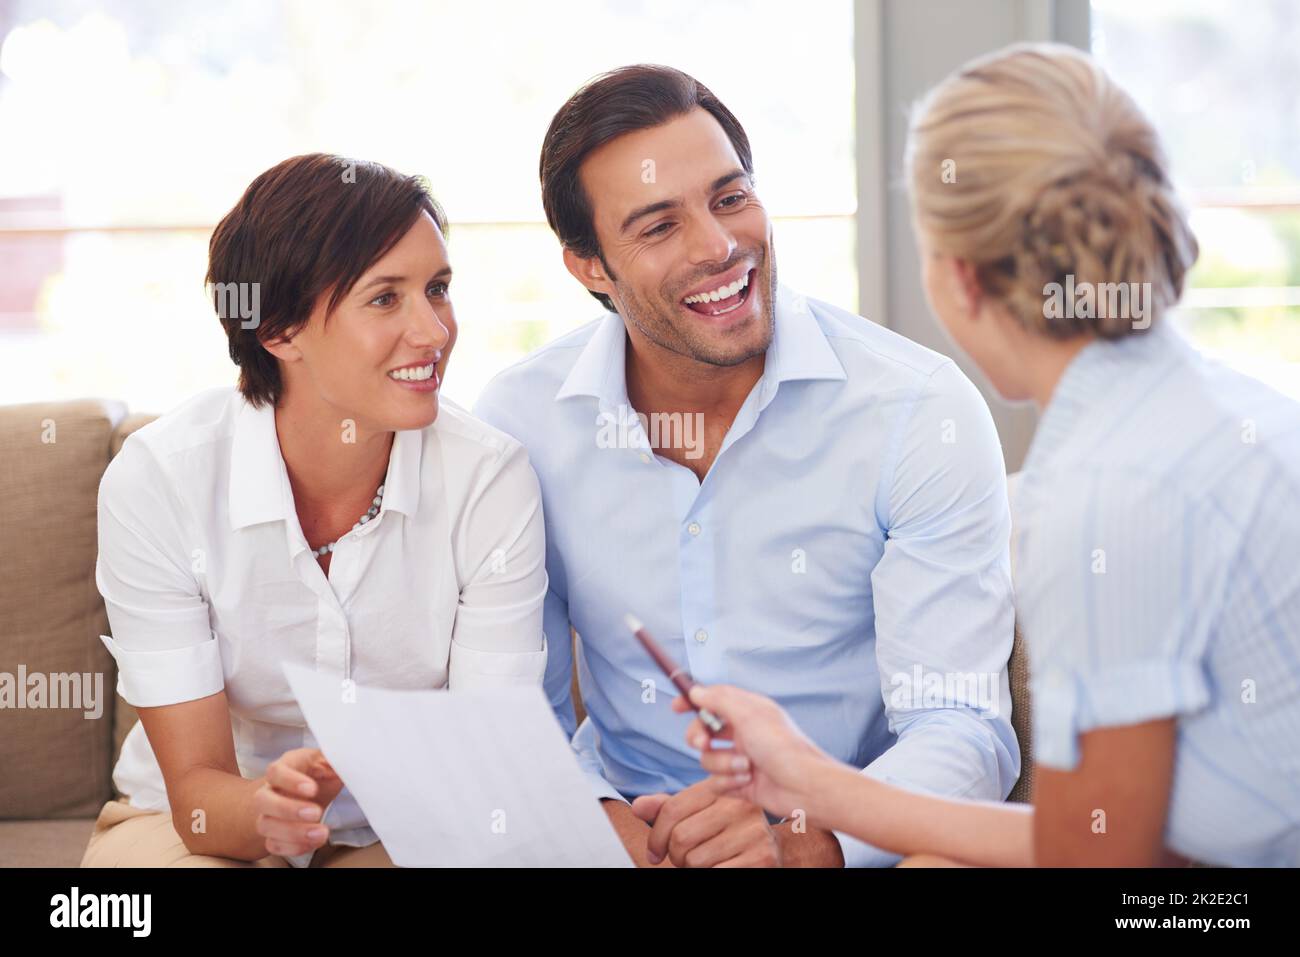 Making smart investment choices. Shot of a financial advisor explaining documents to a couple. Stock Photo